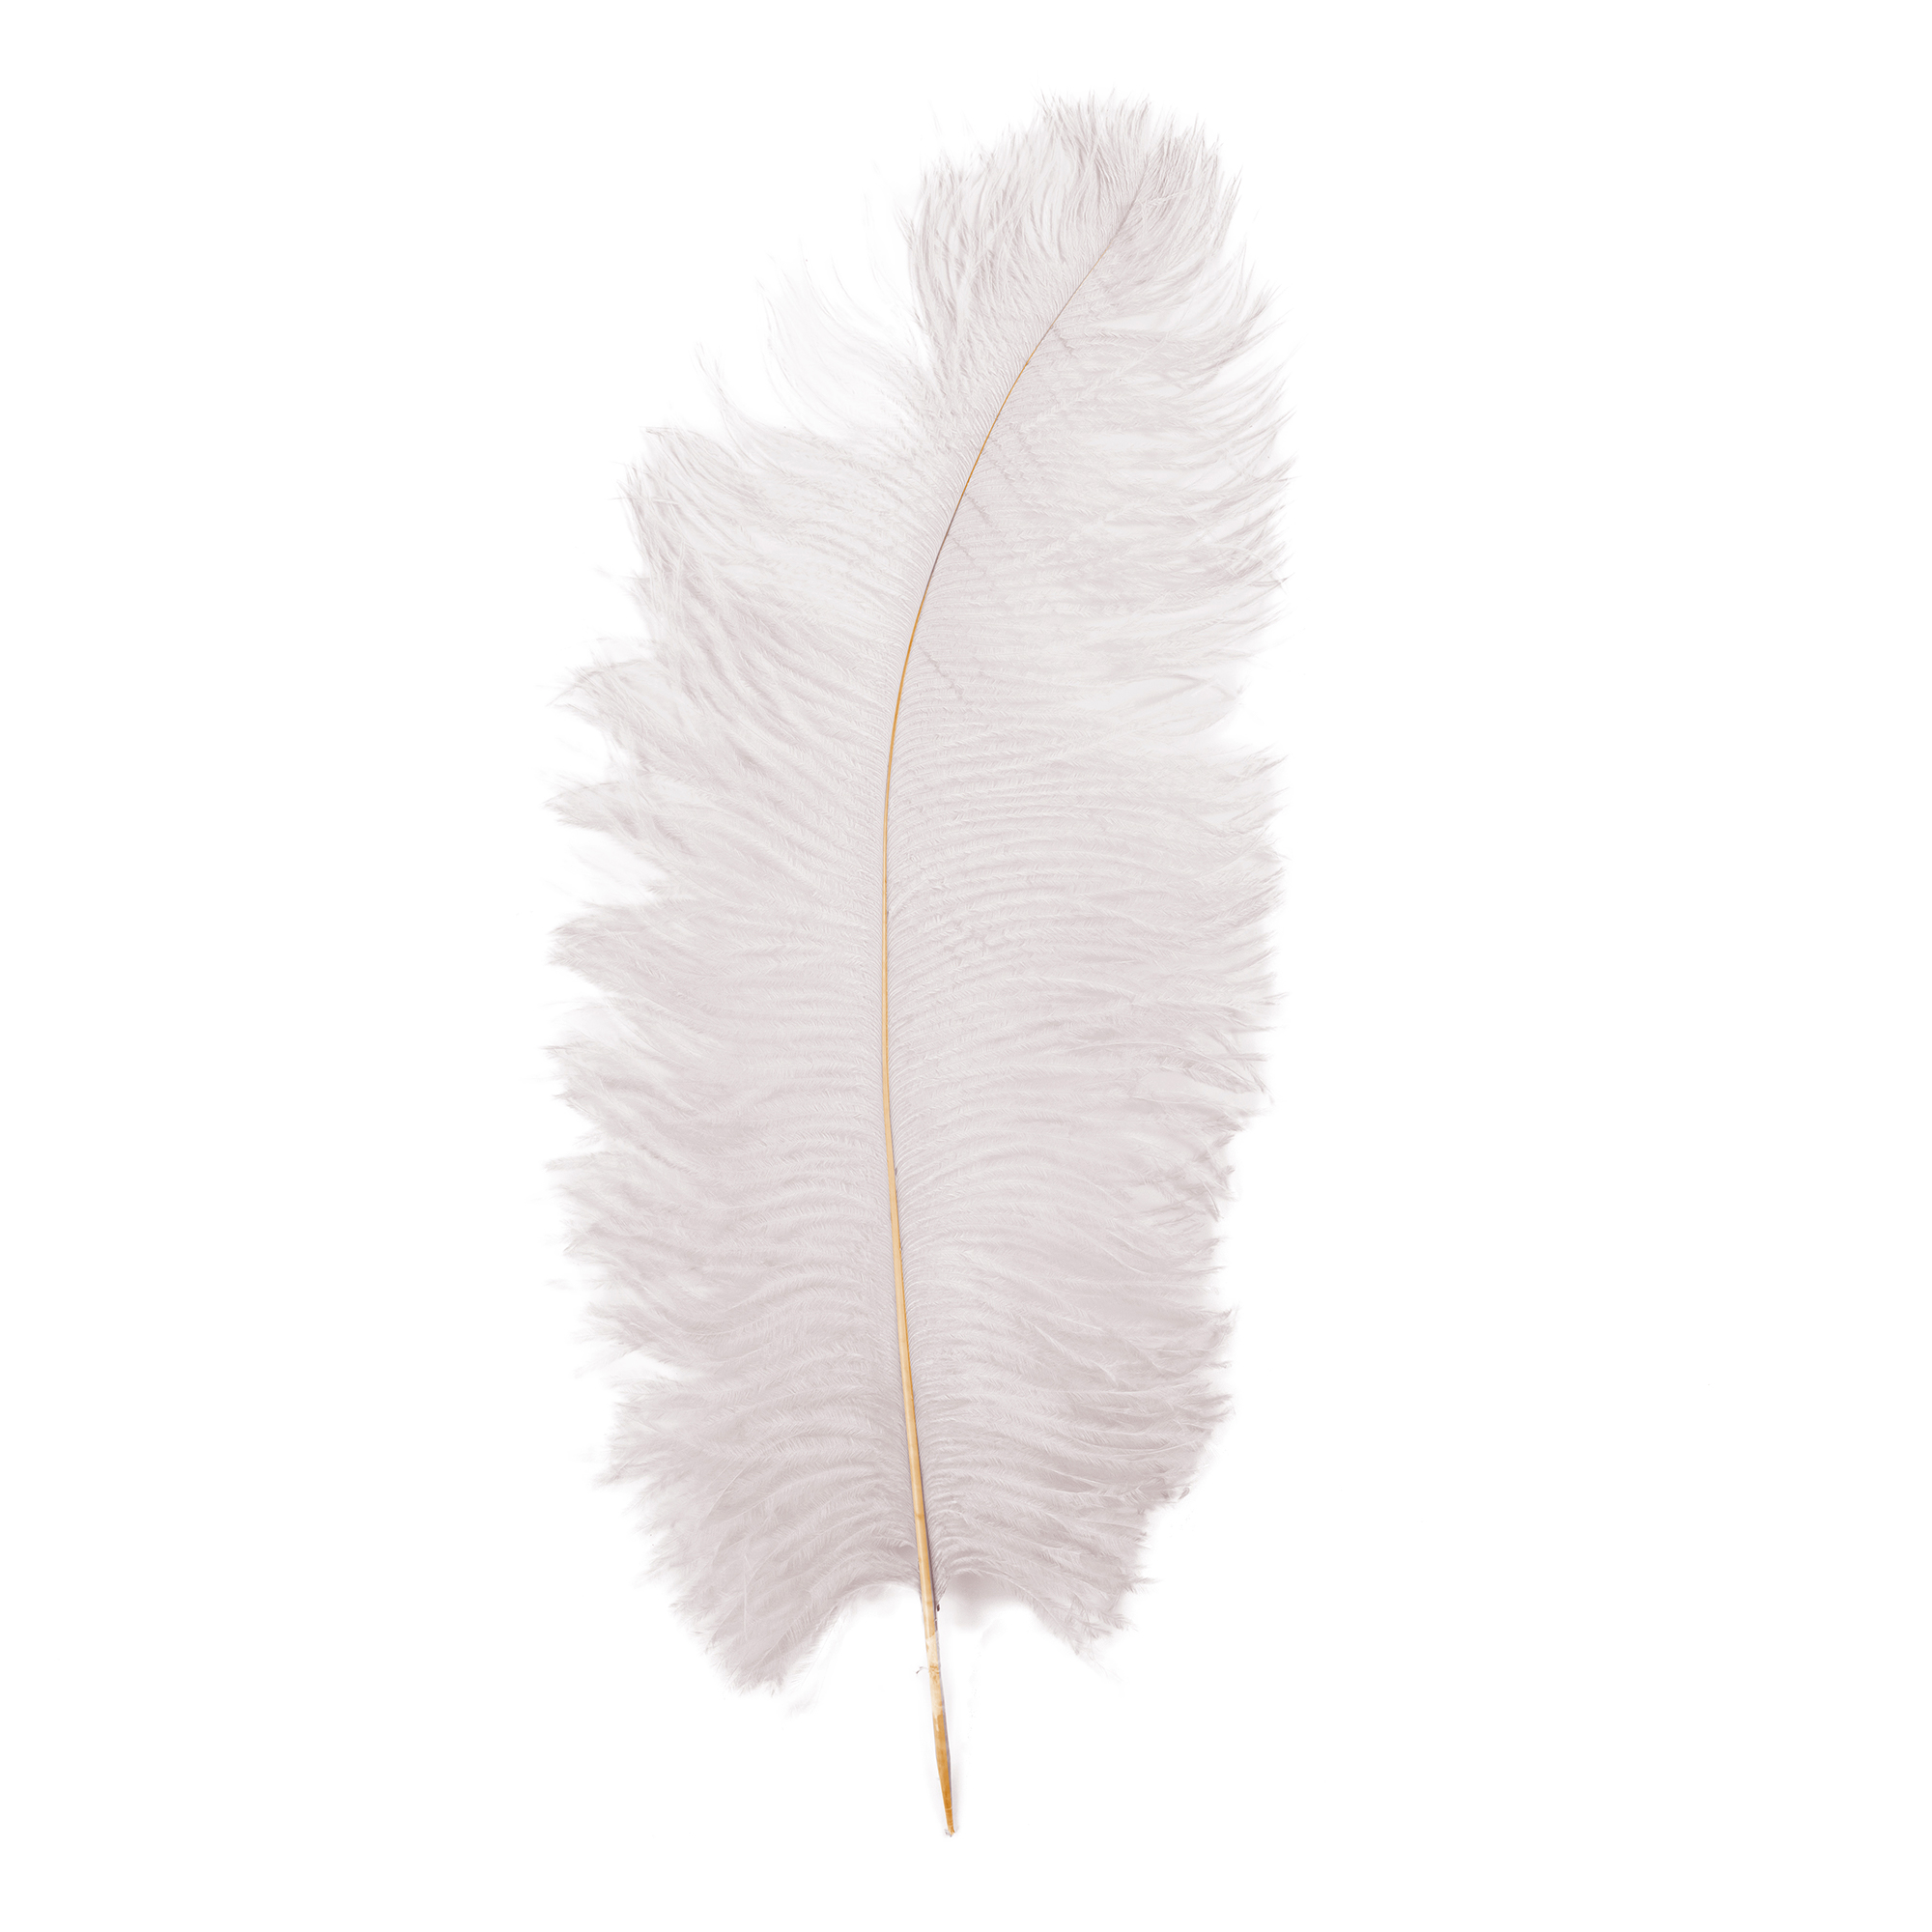 Ostrich Feather 23" 10pc/bag - White